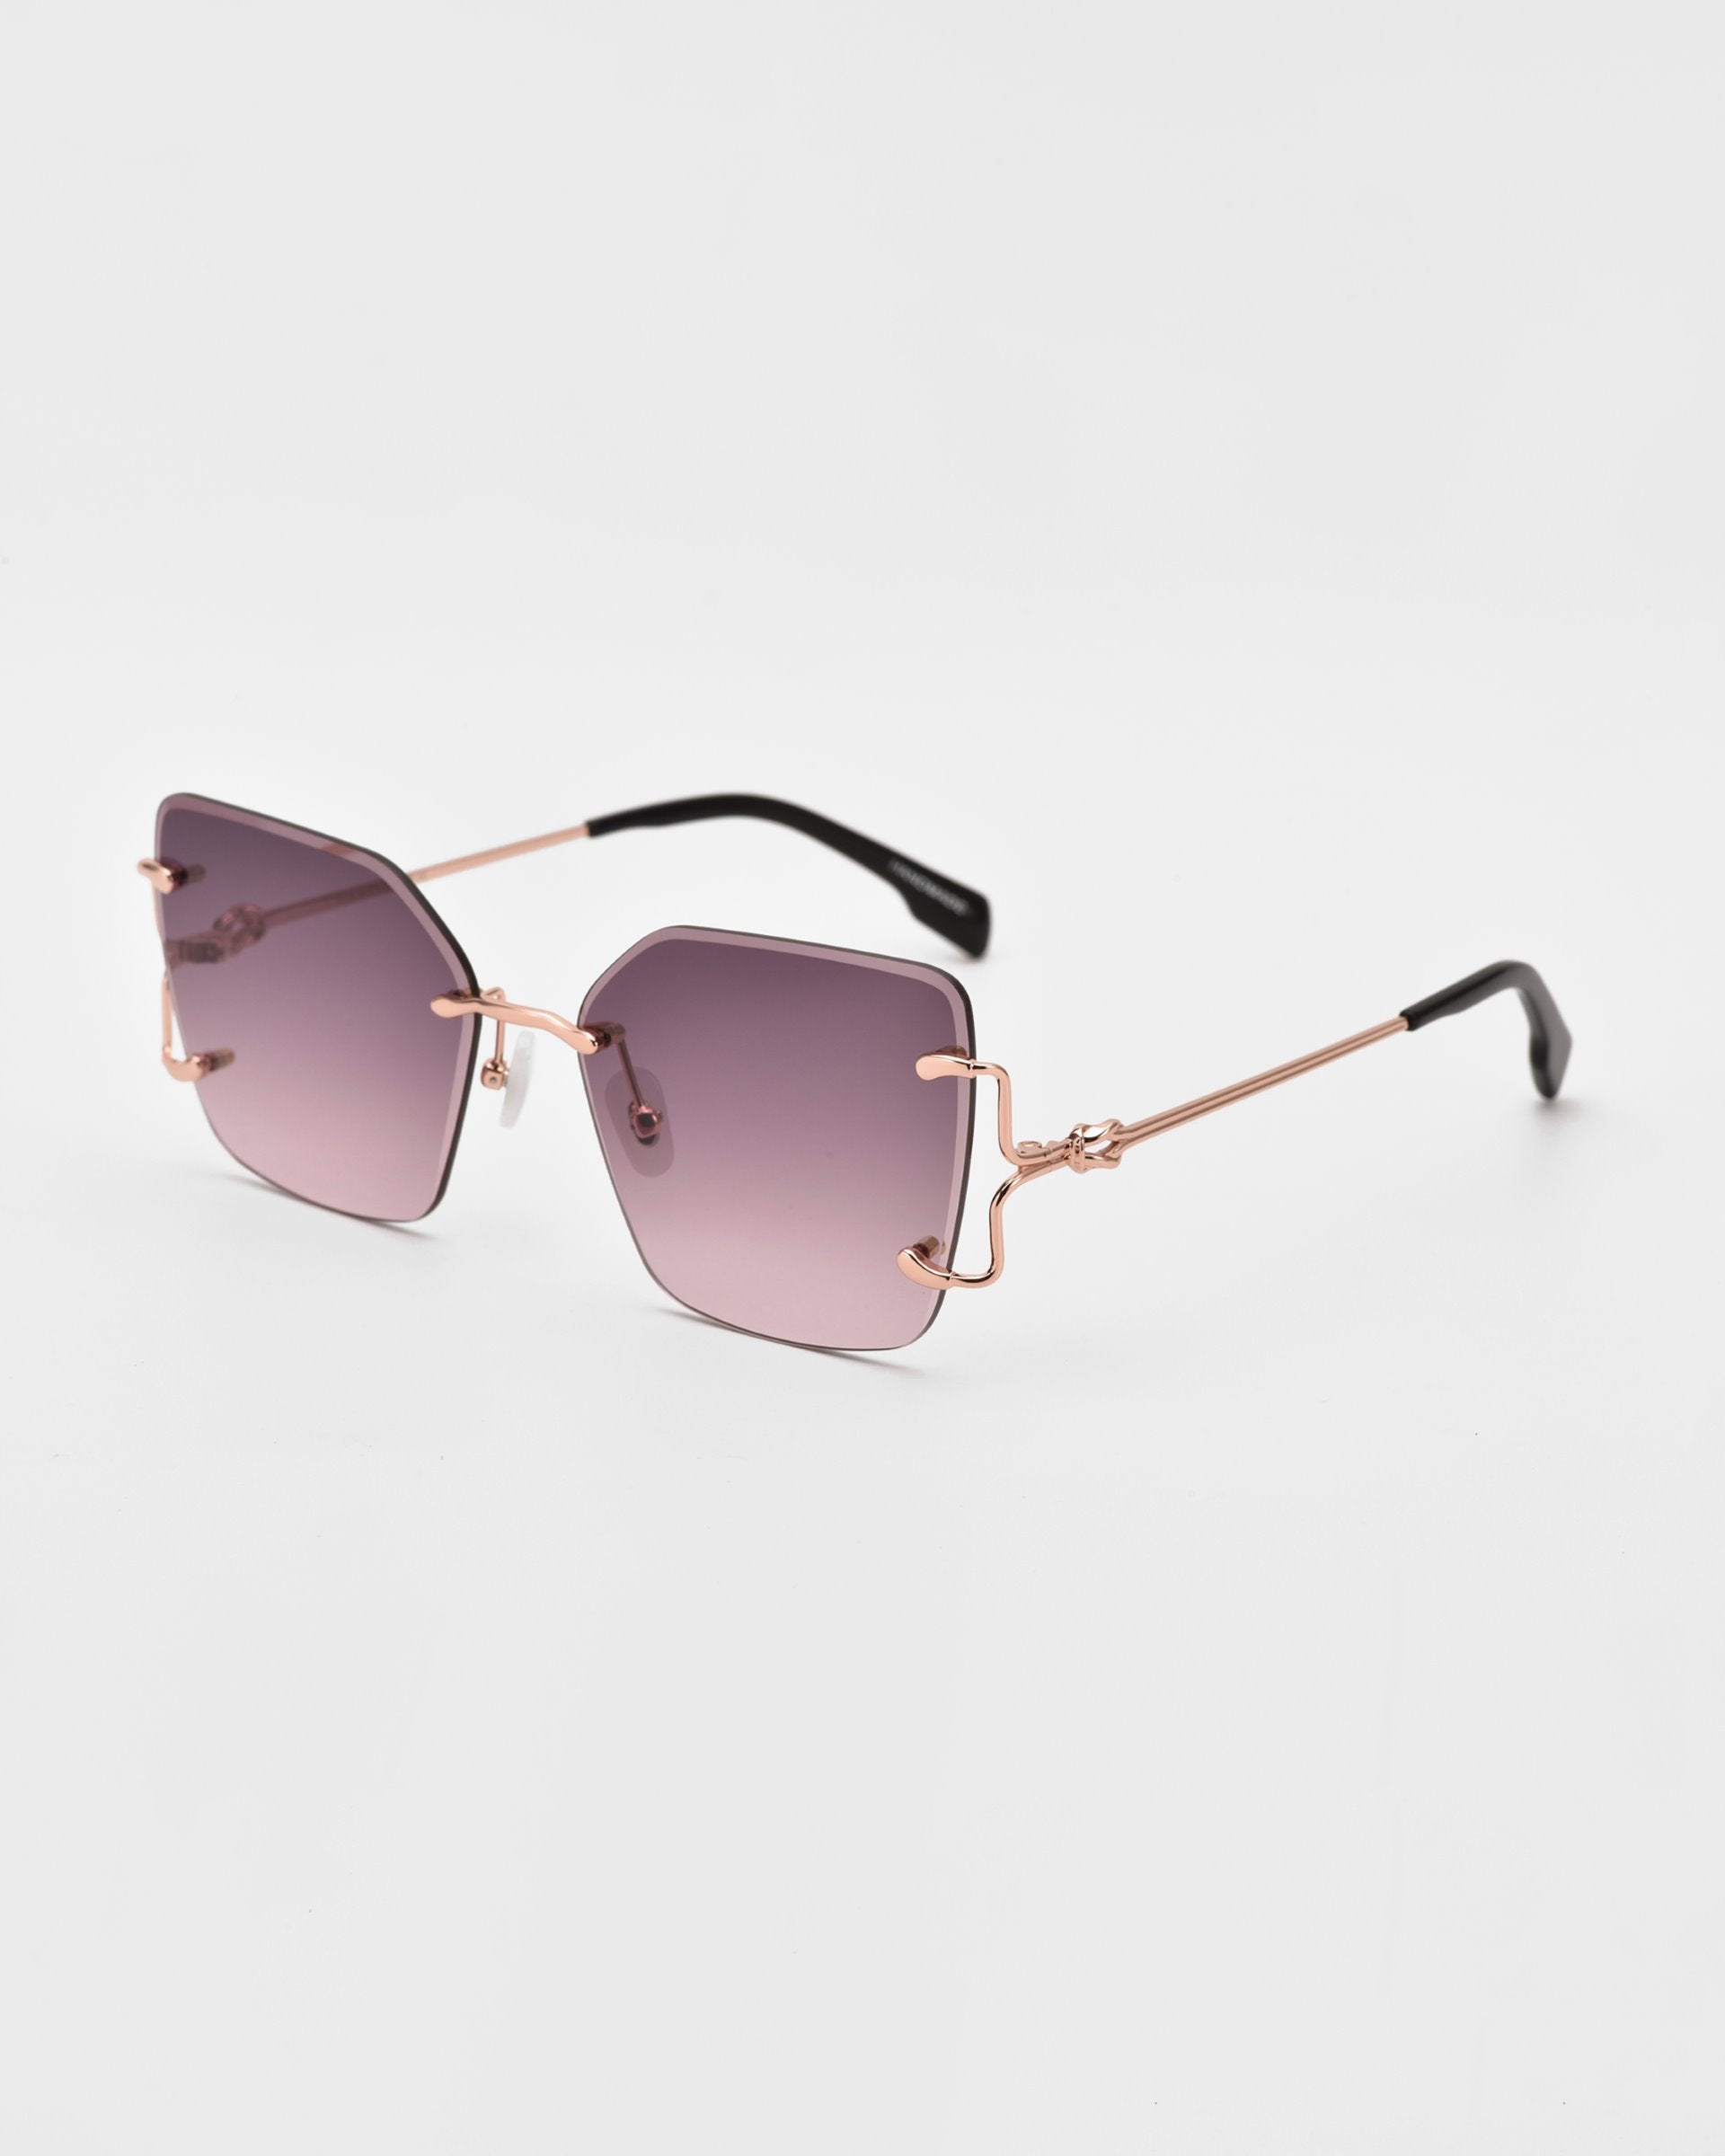 A pair of stylish, For Art's Sake® Starlit sunglasses with light purple gradient lenses. They feature oversized square lenses, unique geometric shapes, rose gold-tone metal accents, and black temple tips. The design is modern and fashionable, suited for both casual and chic looks.